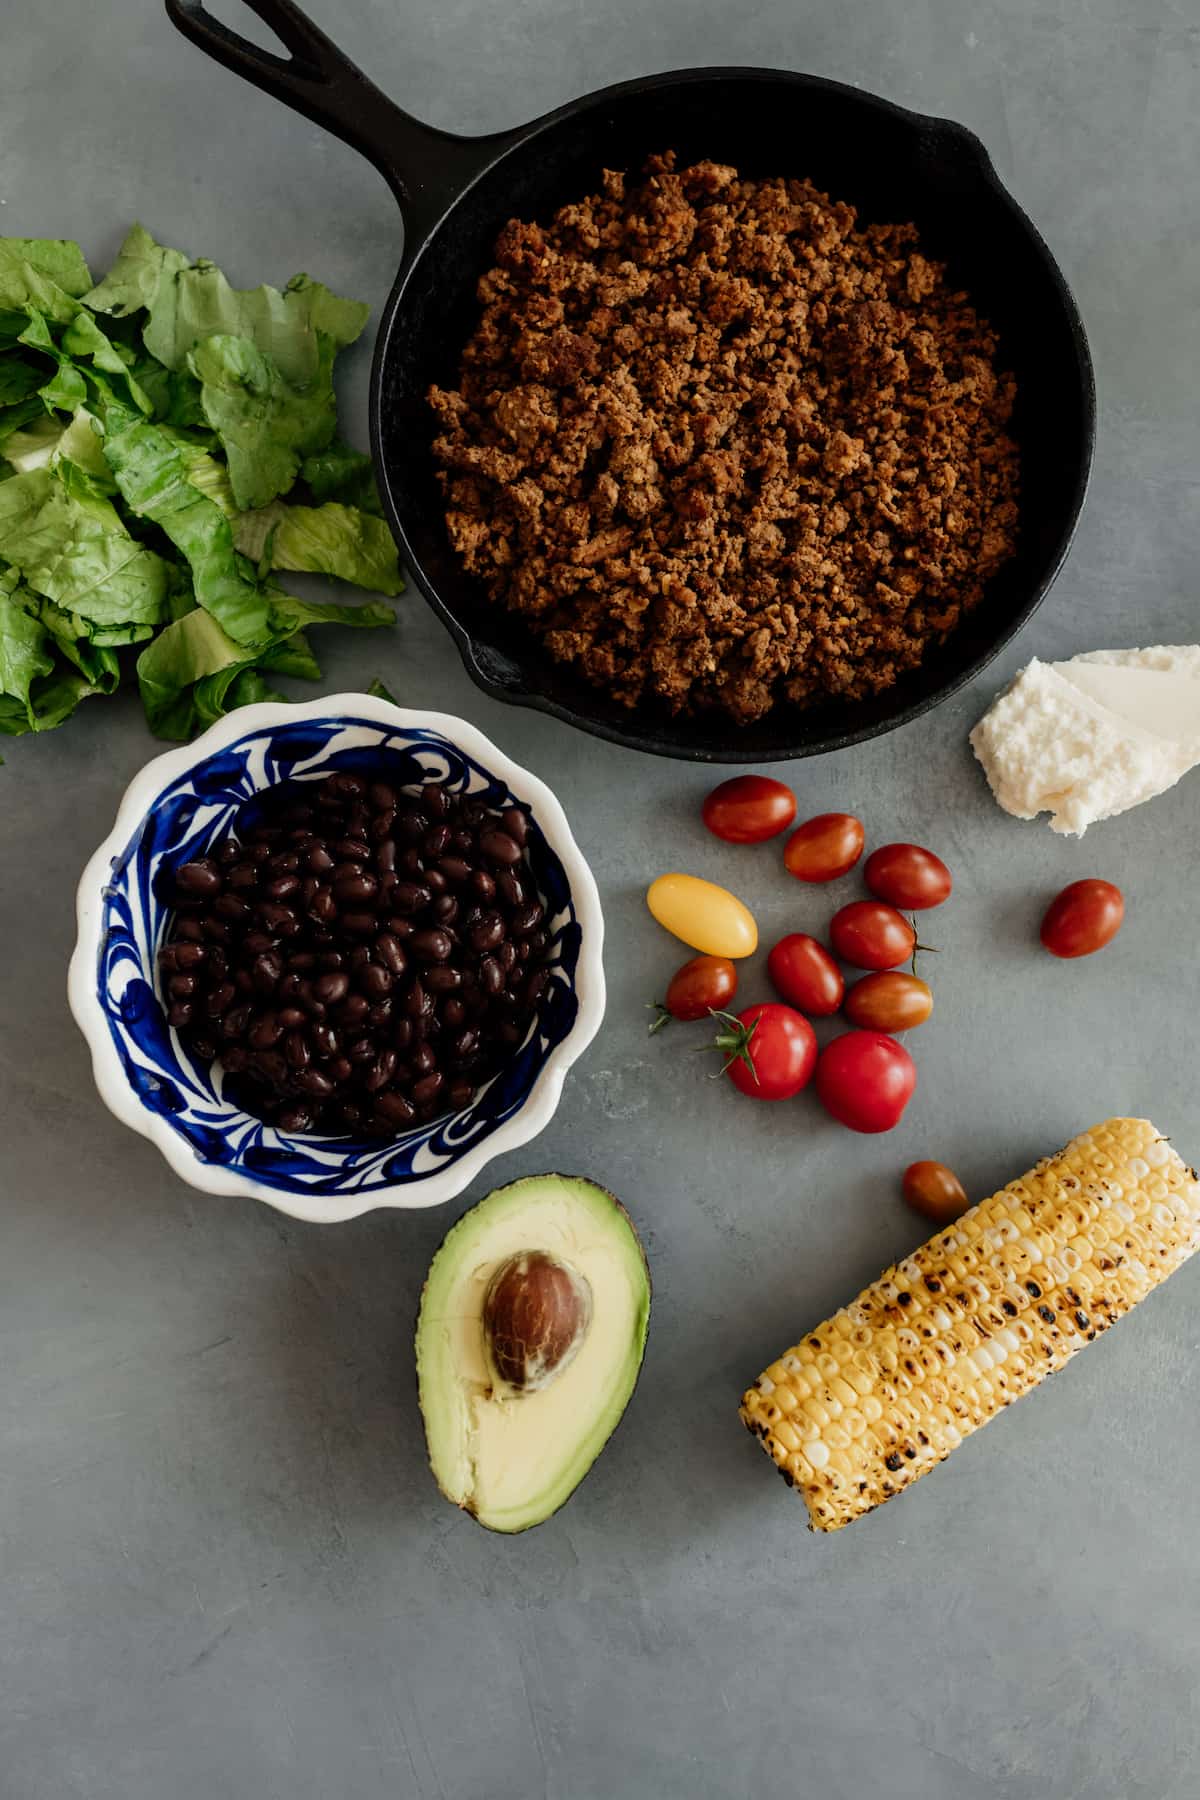 skillet with ground bison and ingredients for a taco salad - corn, avocado, tomatoes, black beans